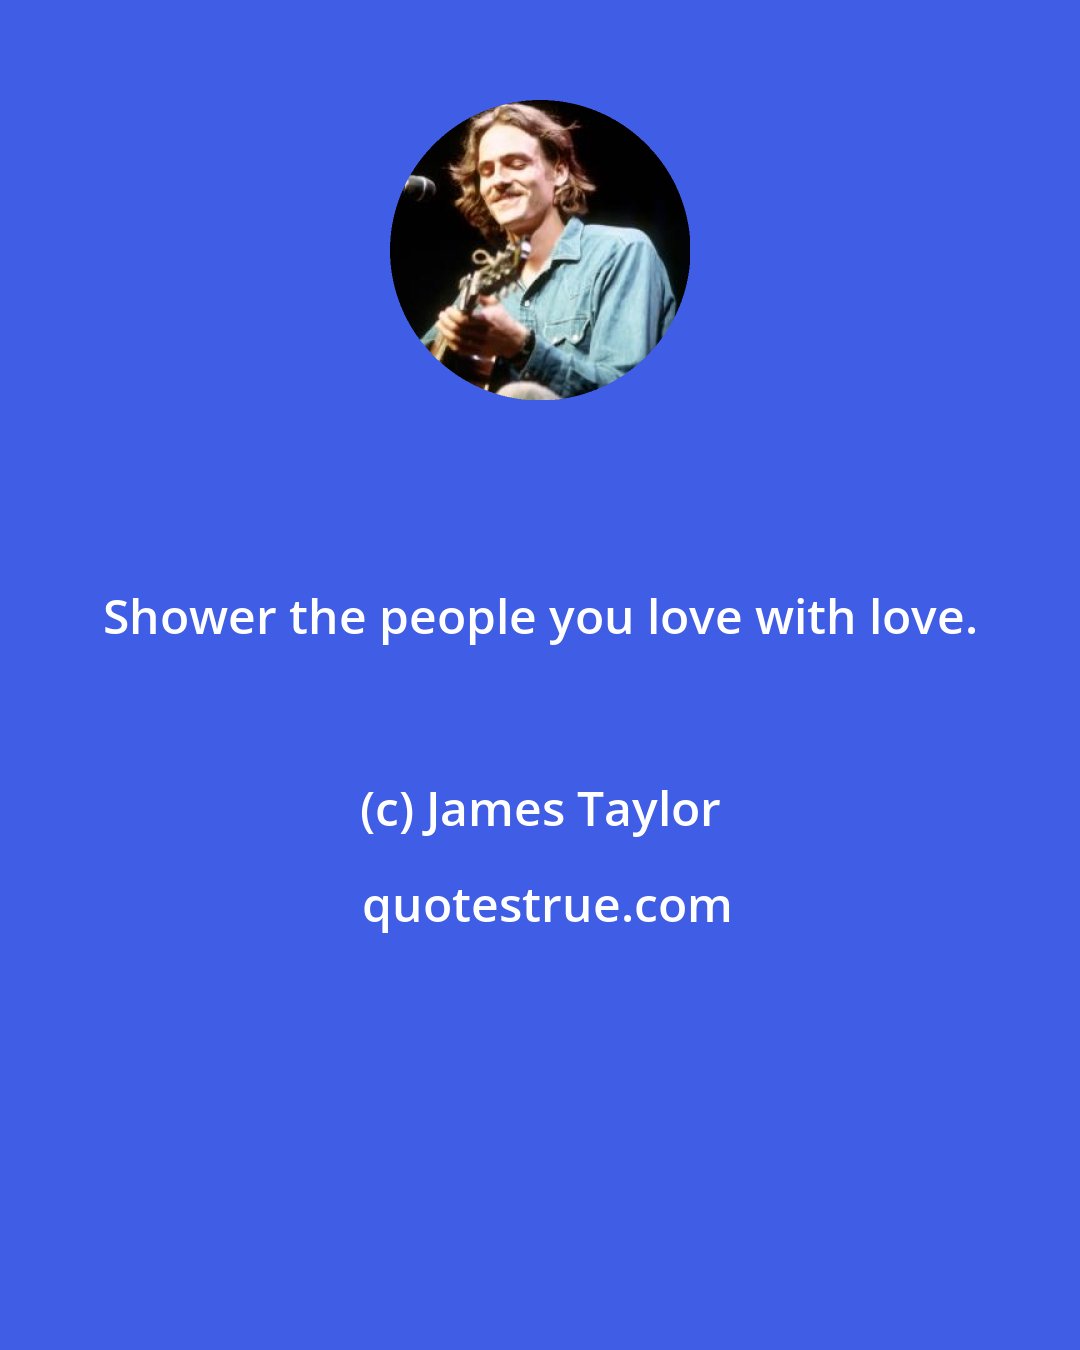 James Taylor: Shower the people you love with love.